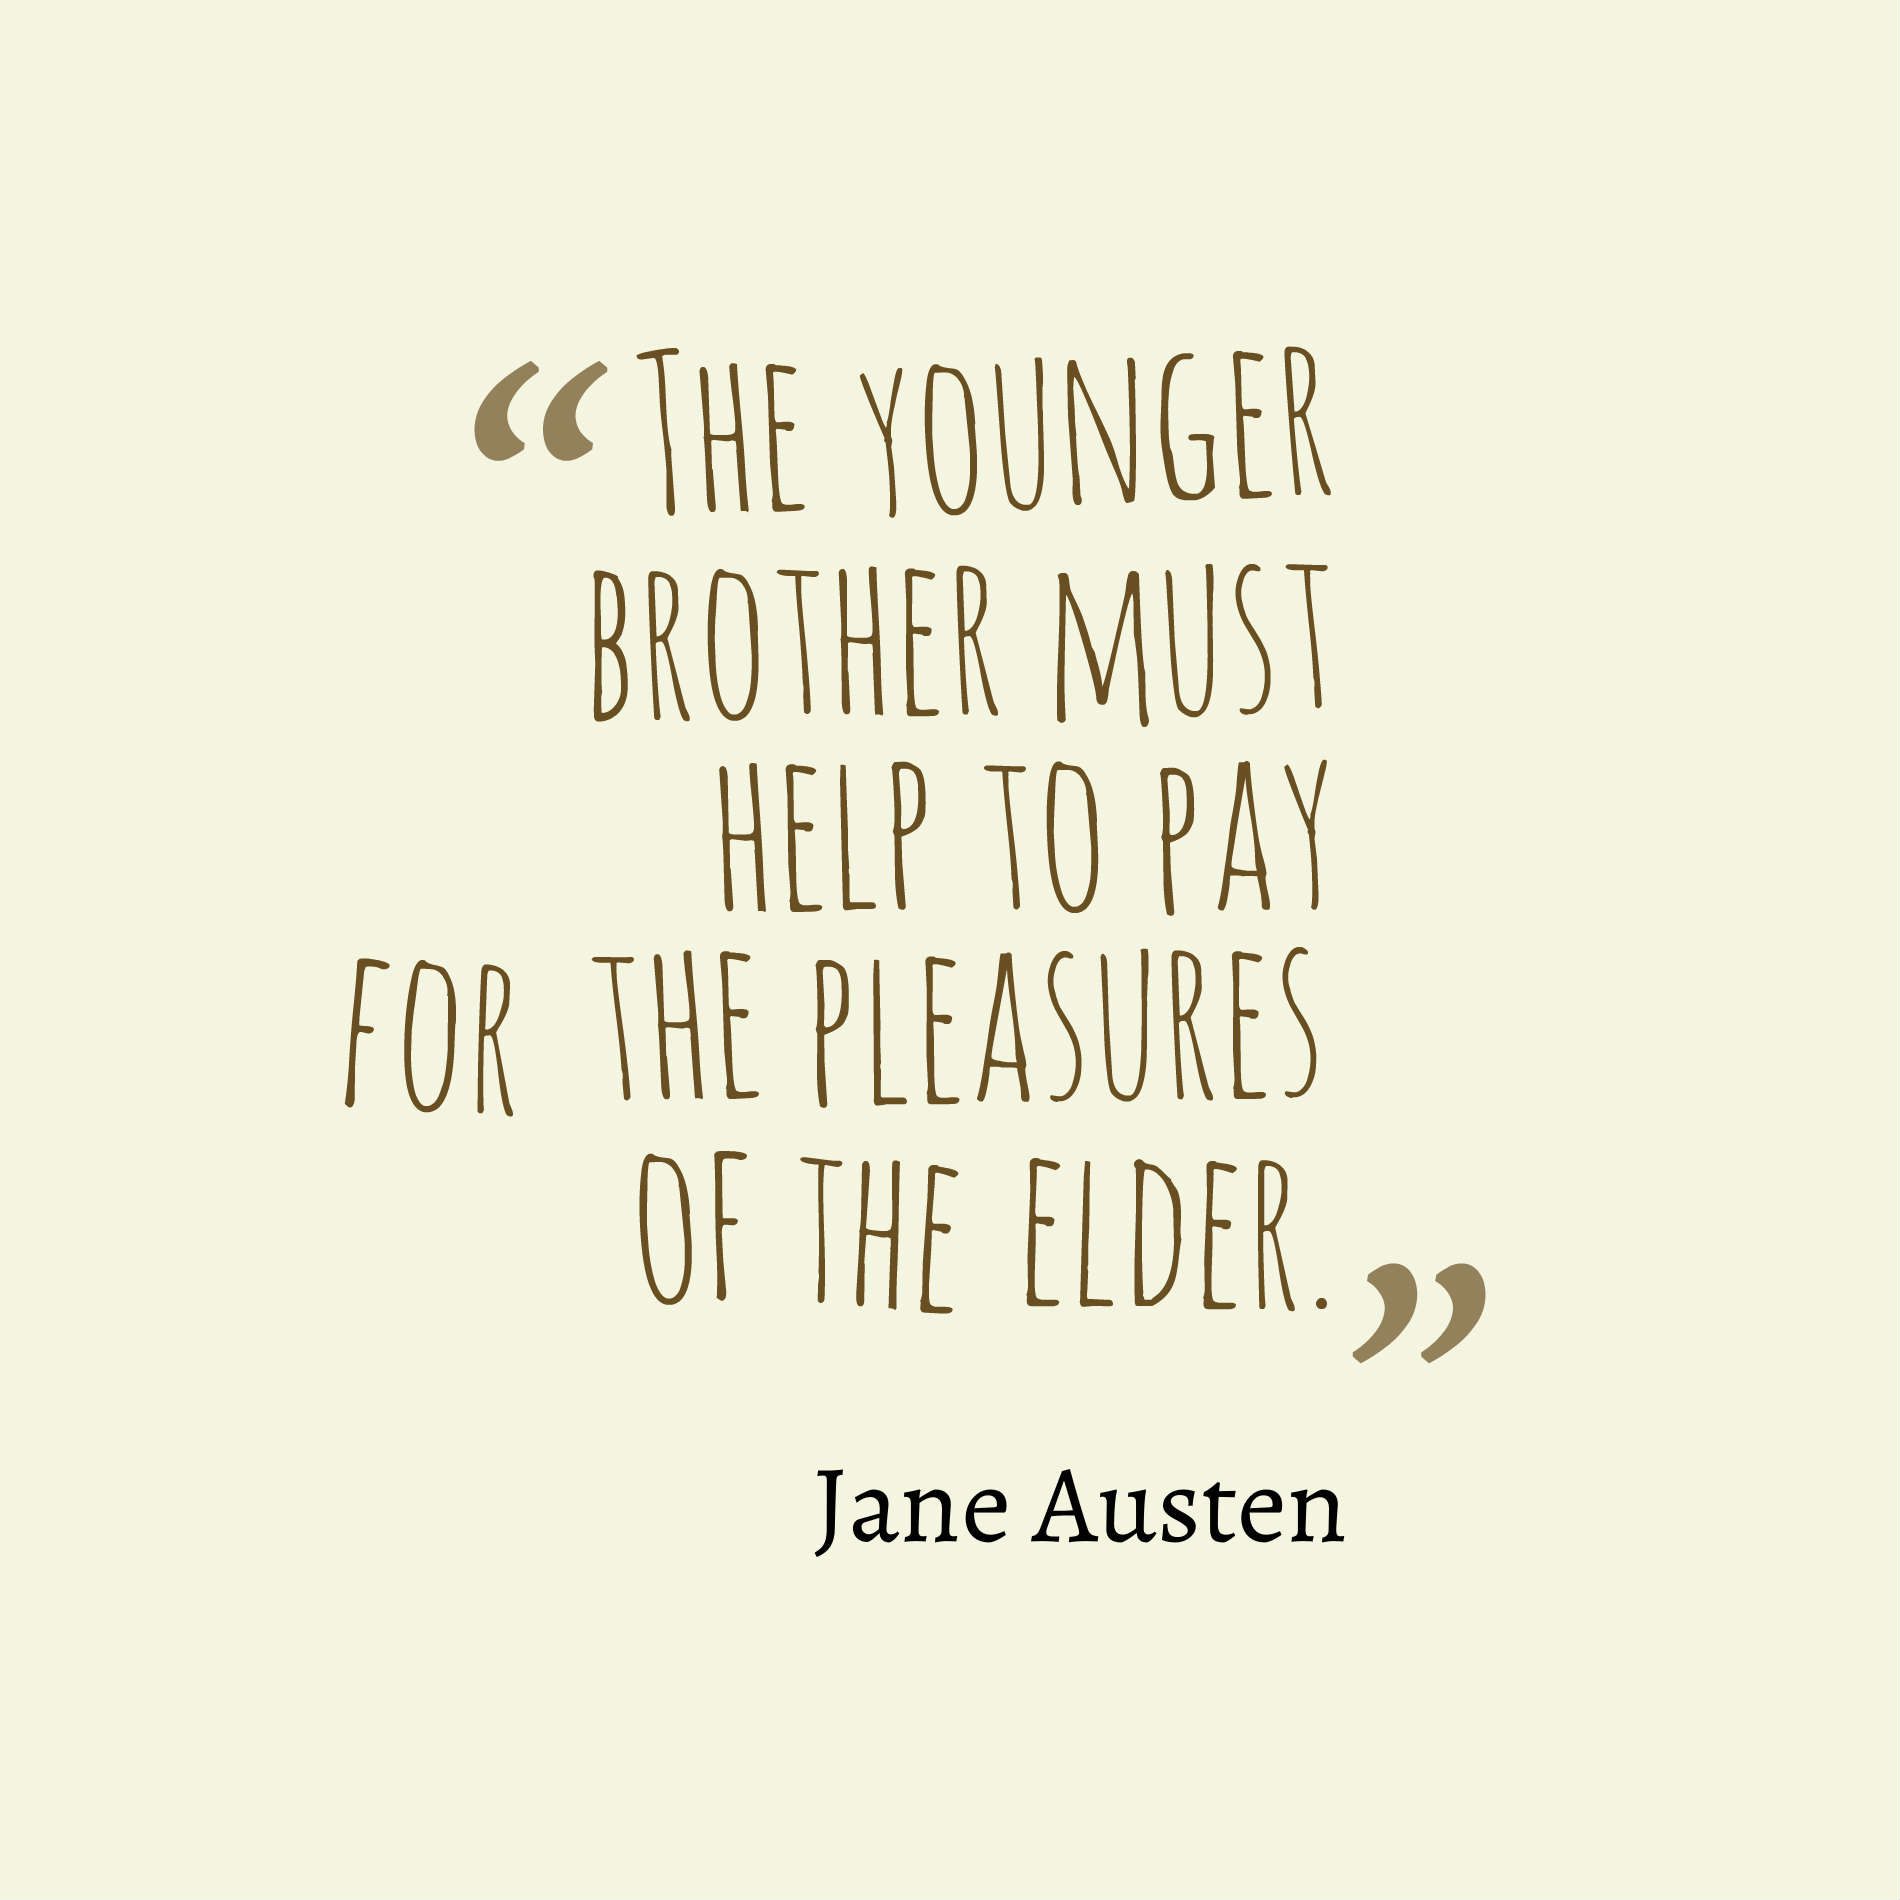 The younger brother must help to pay for the pleasures of the elder.